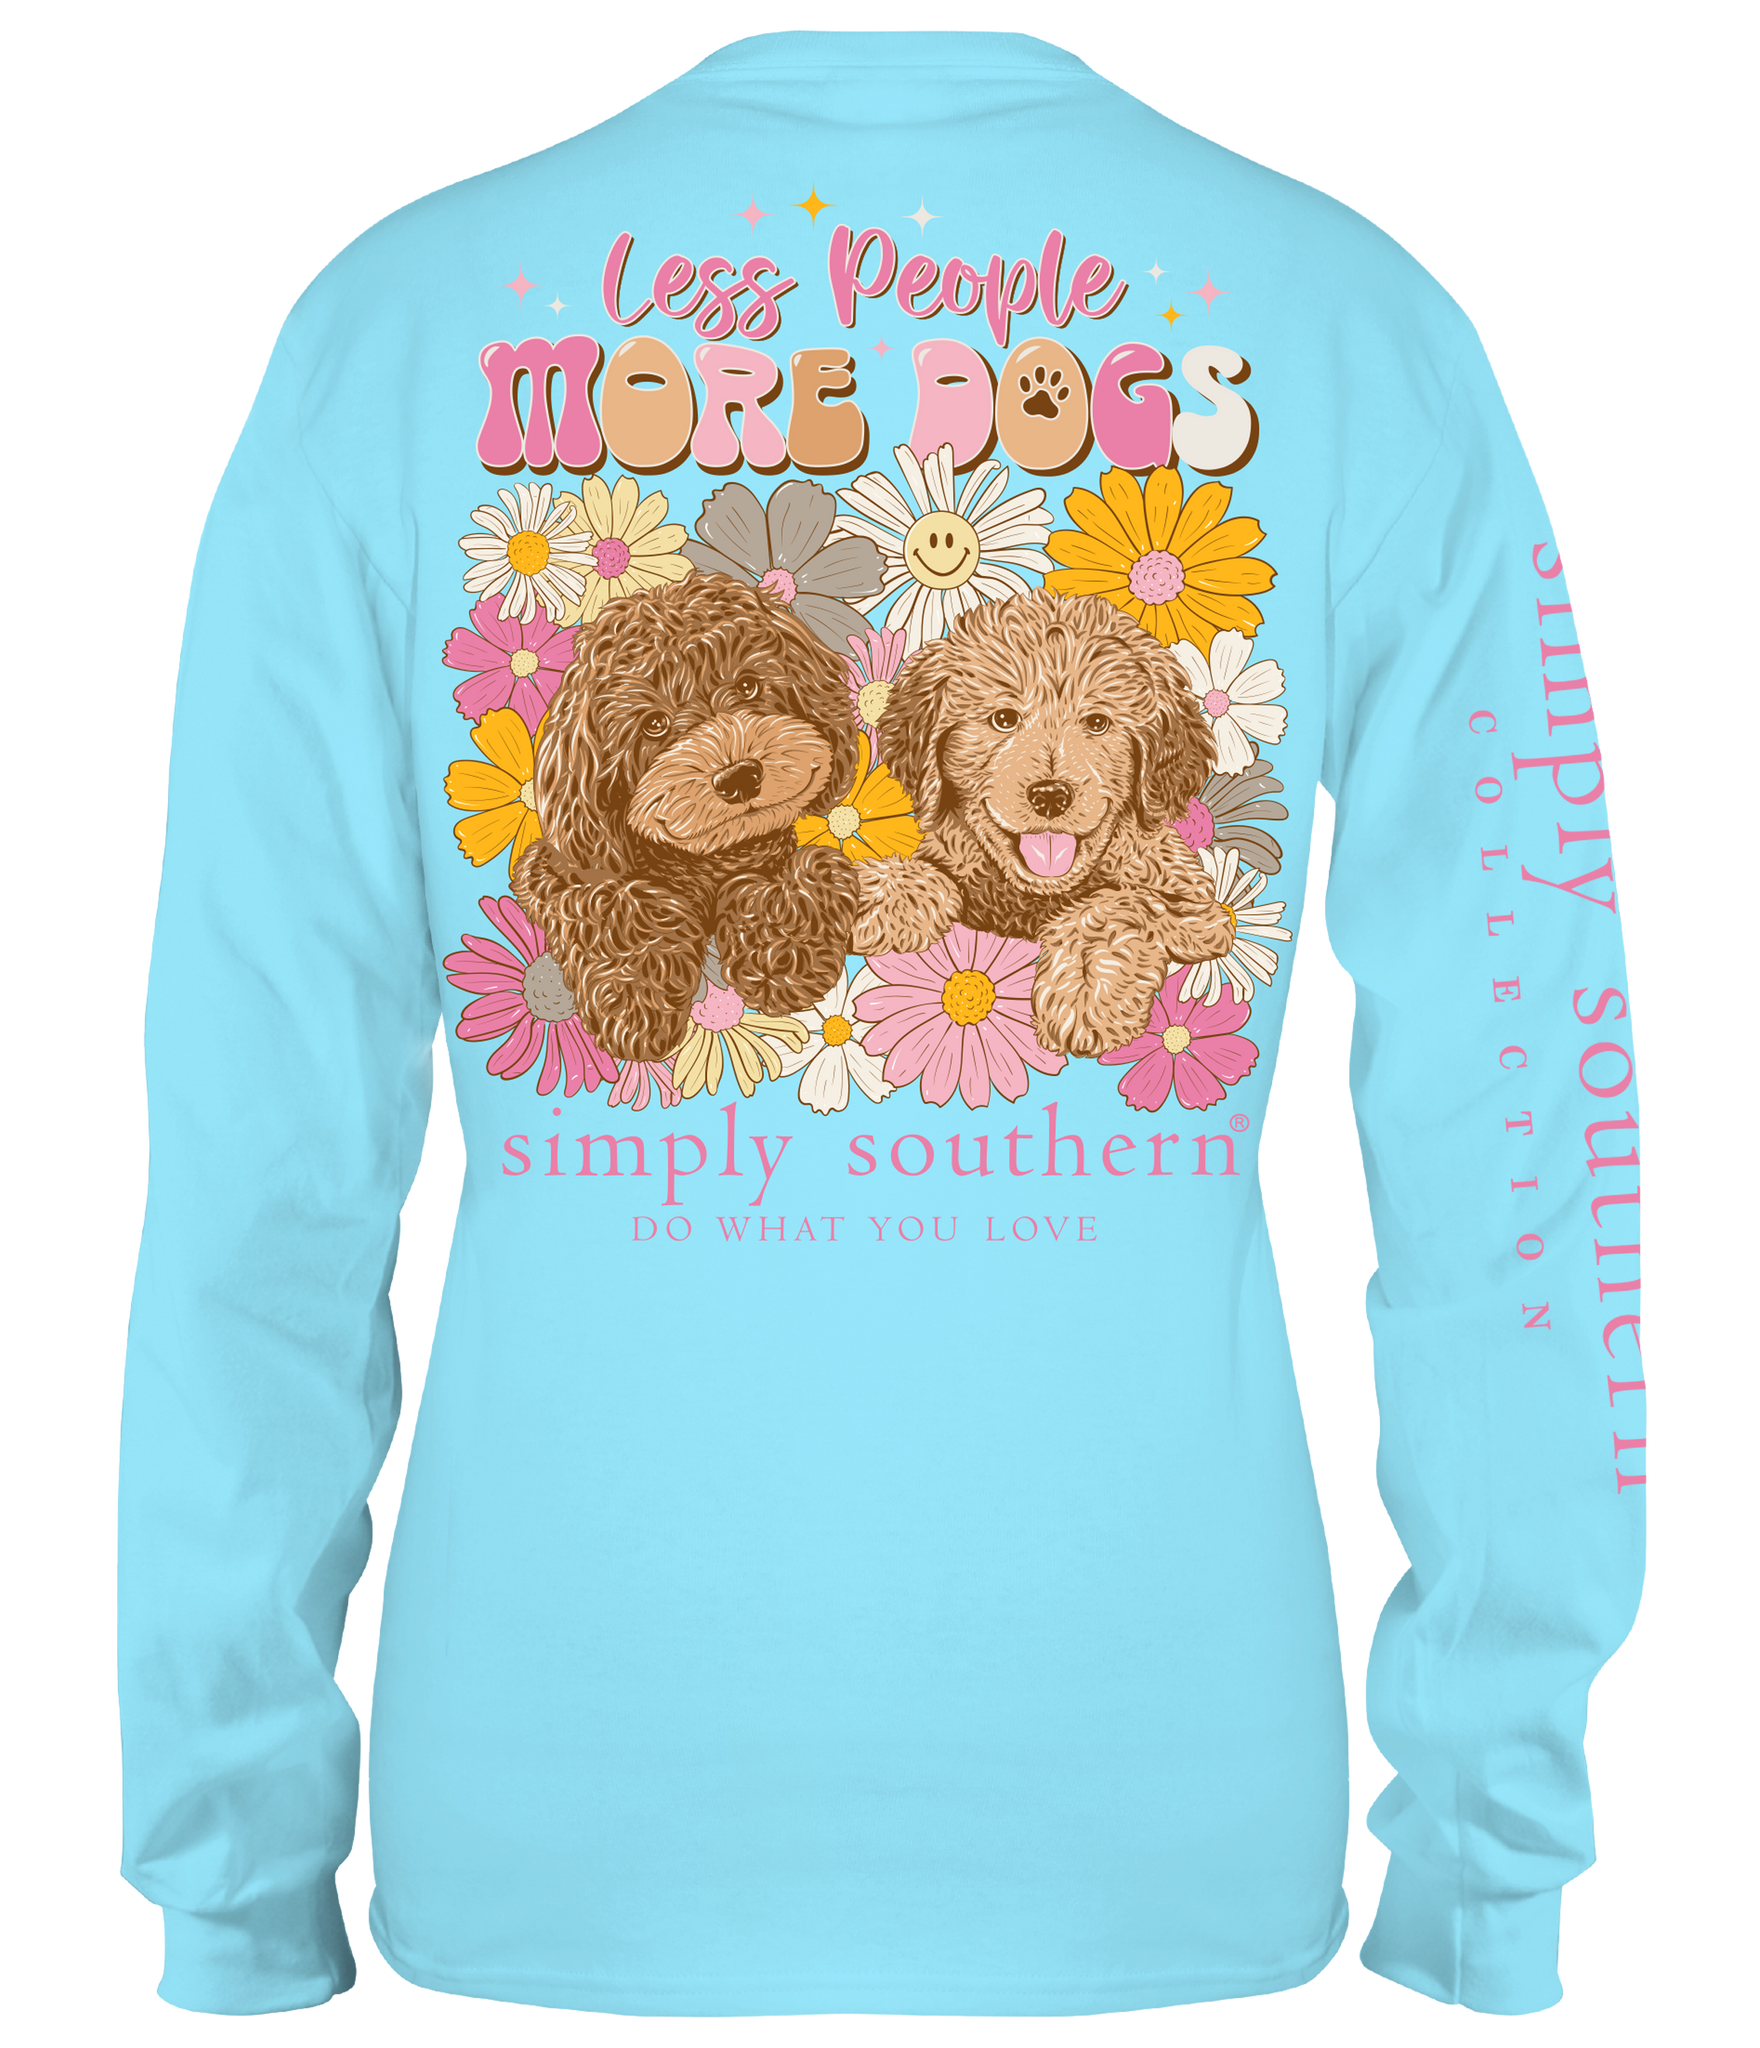 More Dogs LS Tee